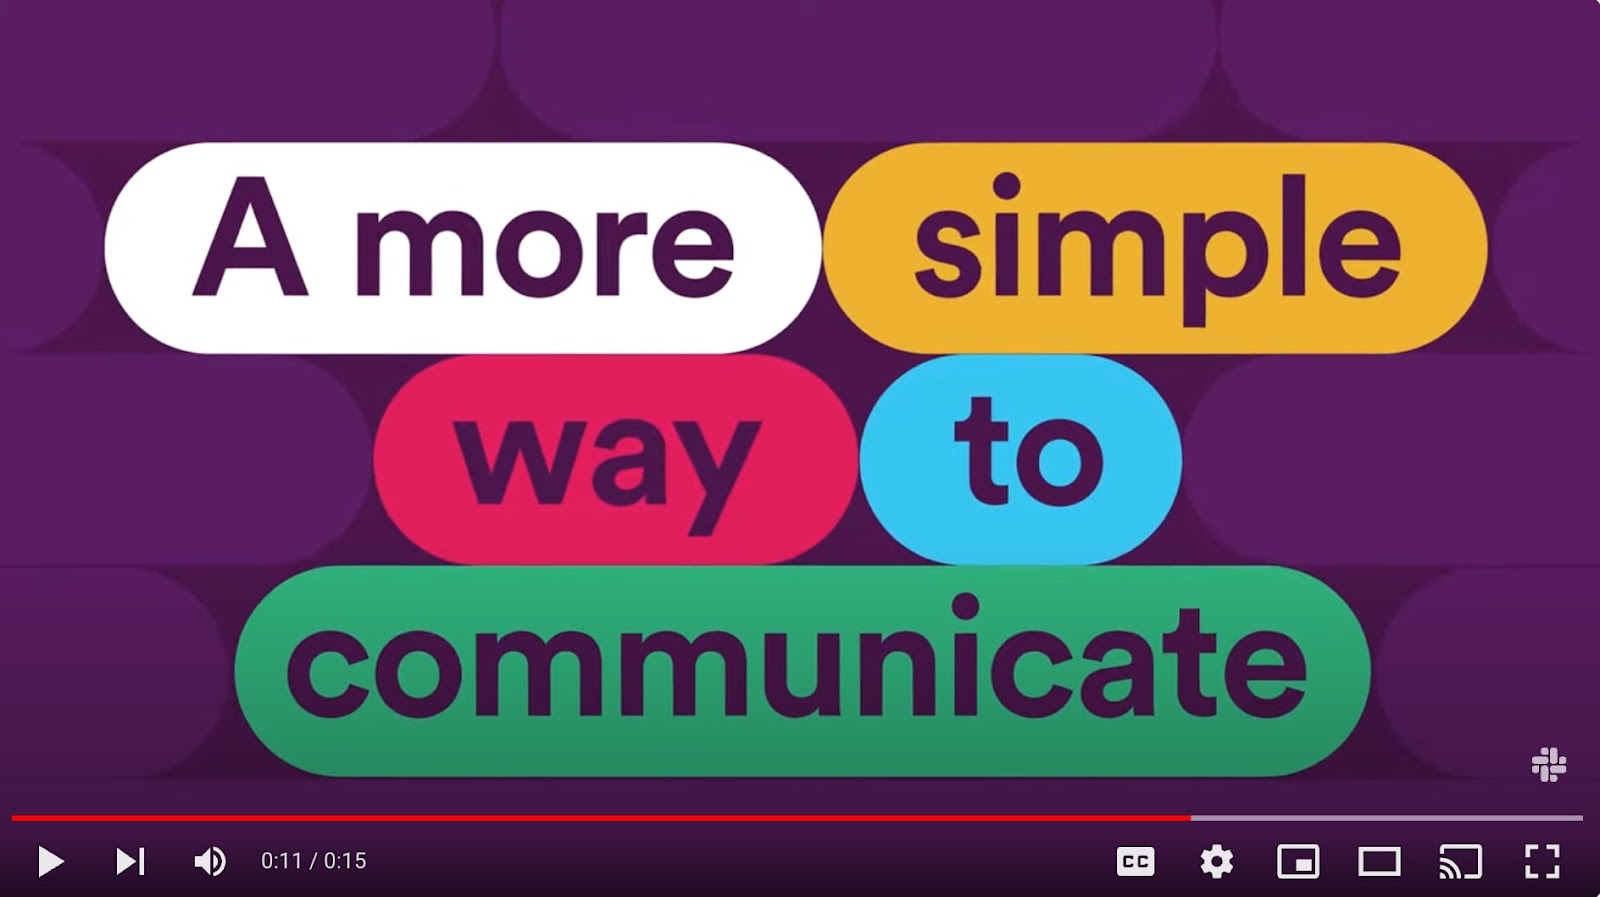 Slack's video ad with pattern interrupt elements forming a message "A more simple way to communicate"